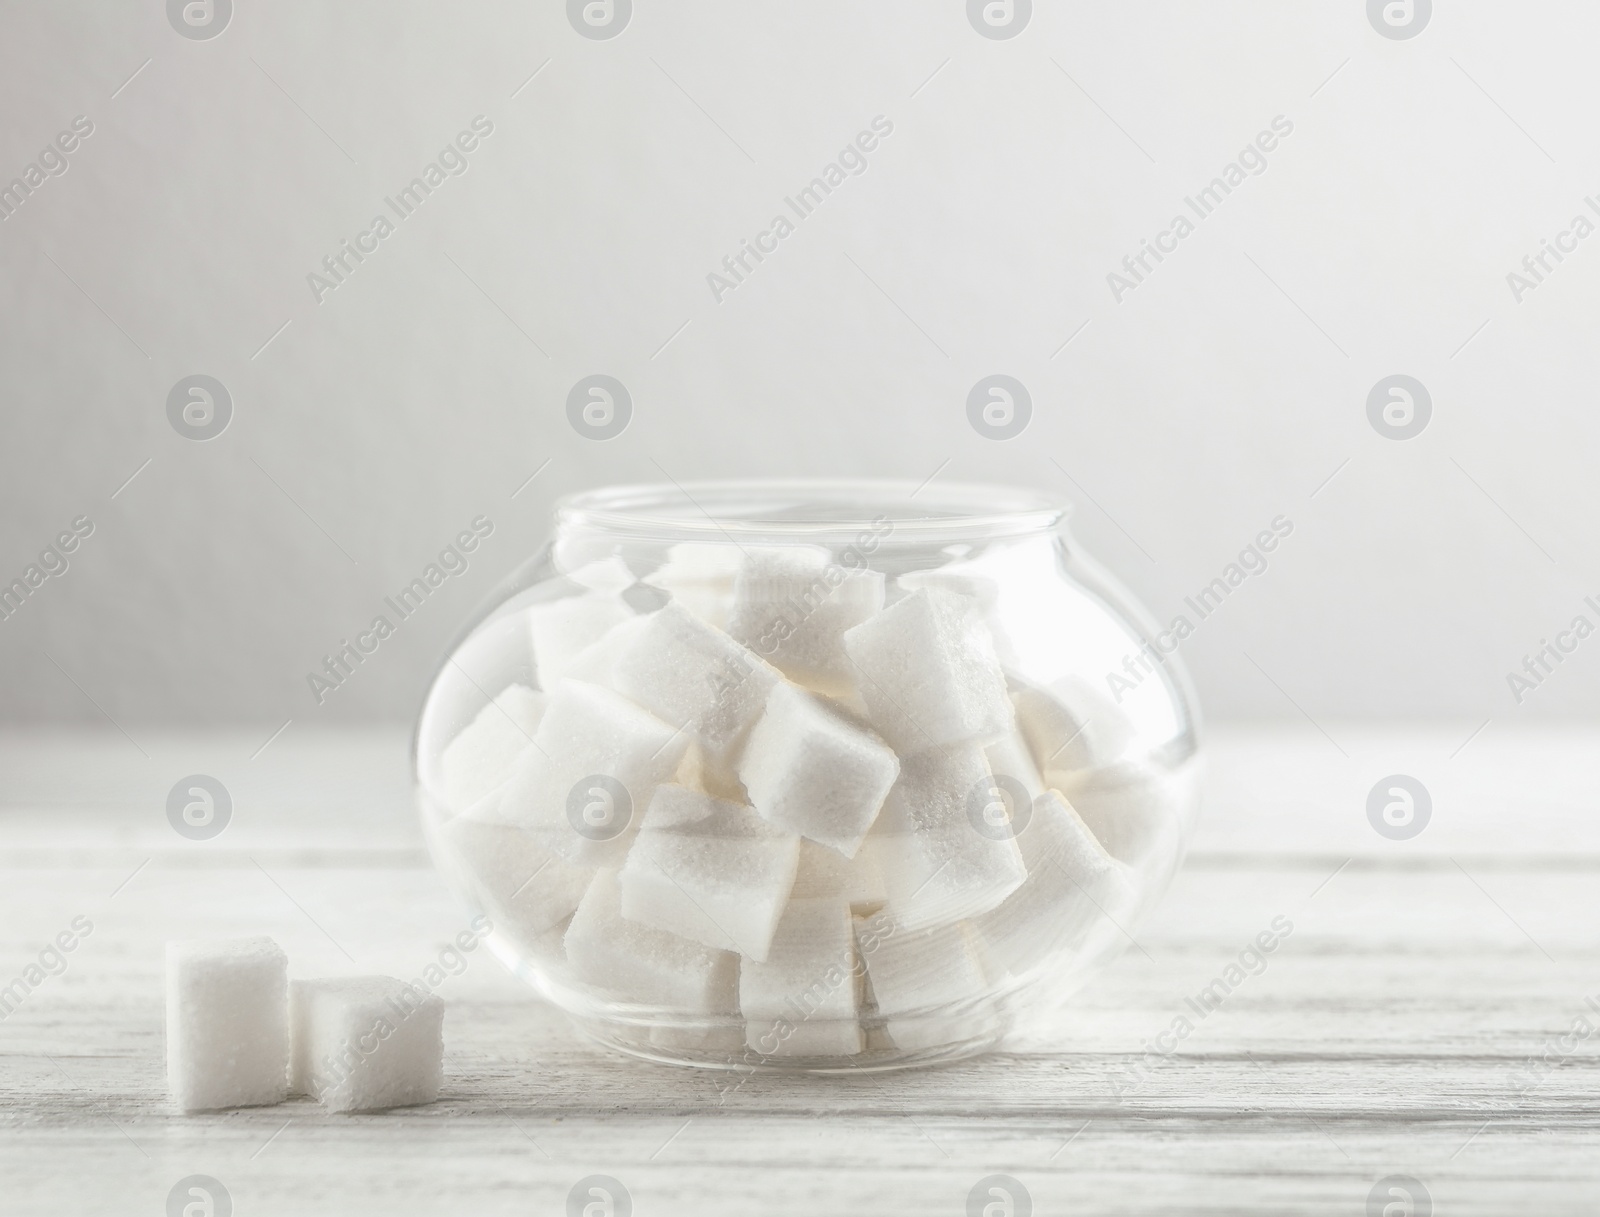 Photo of Refined sugar cubes in glass bowl on white wooden table